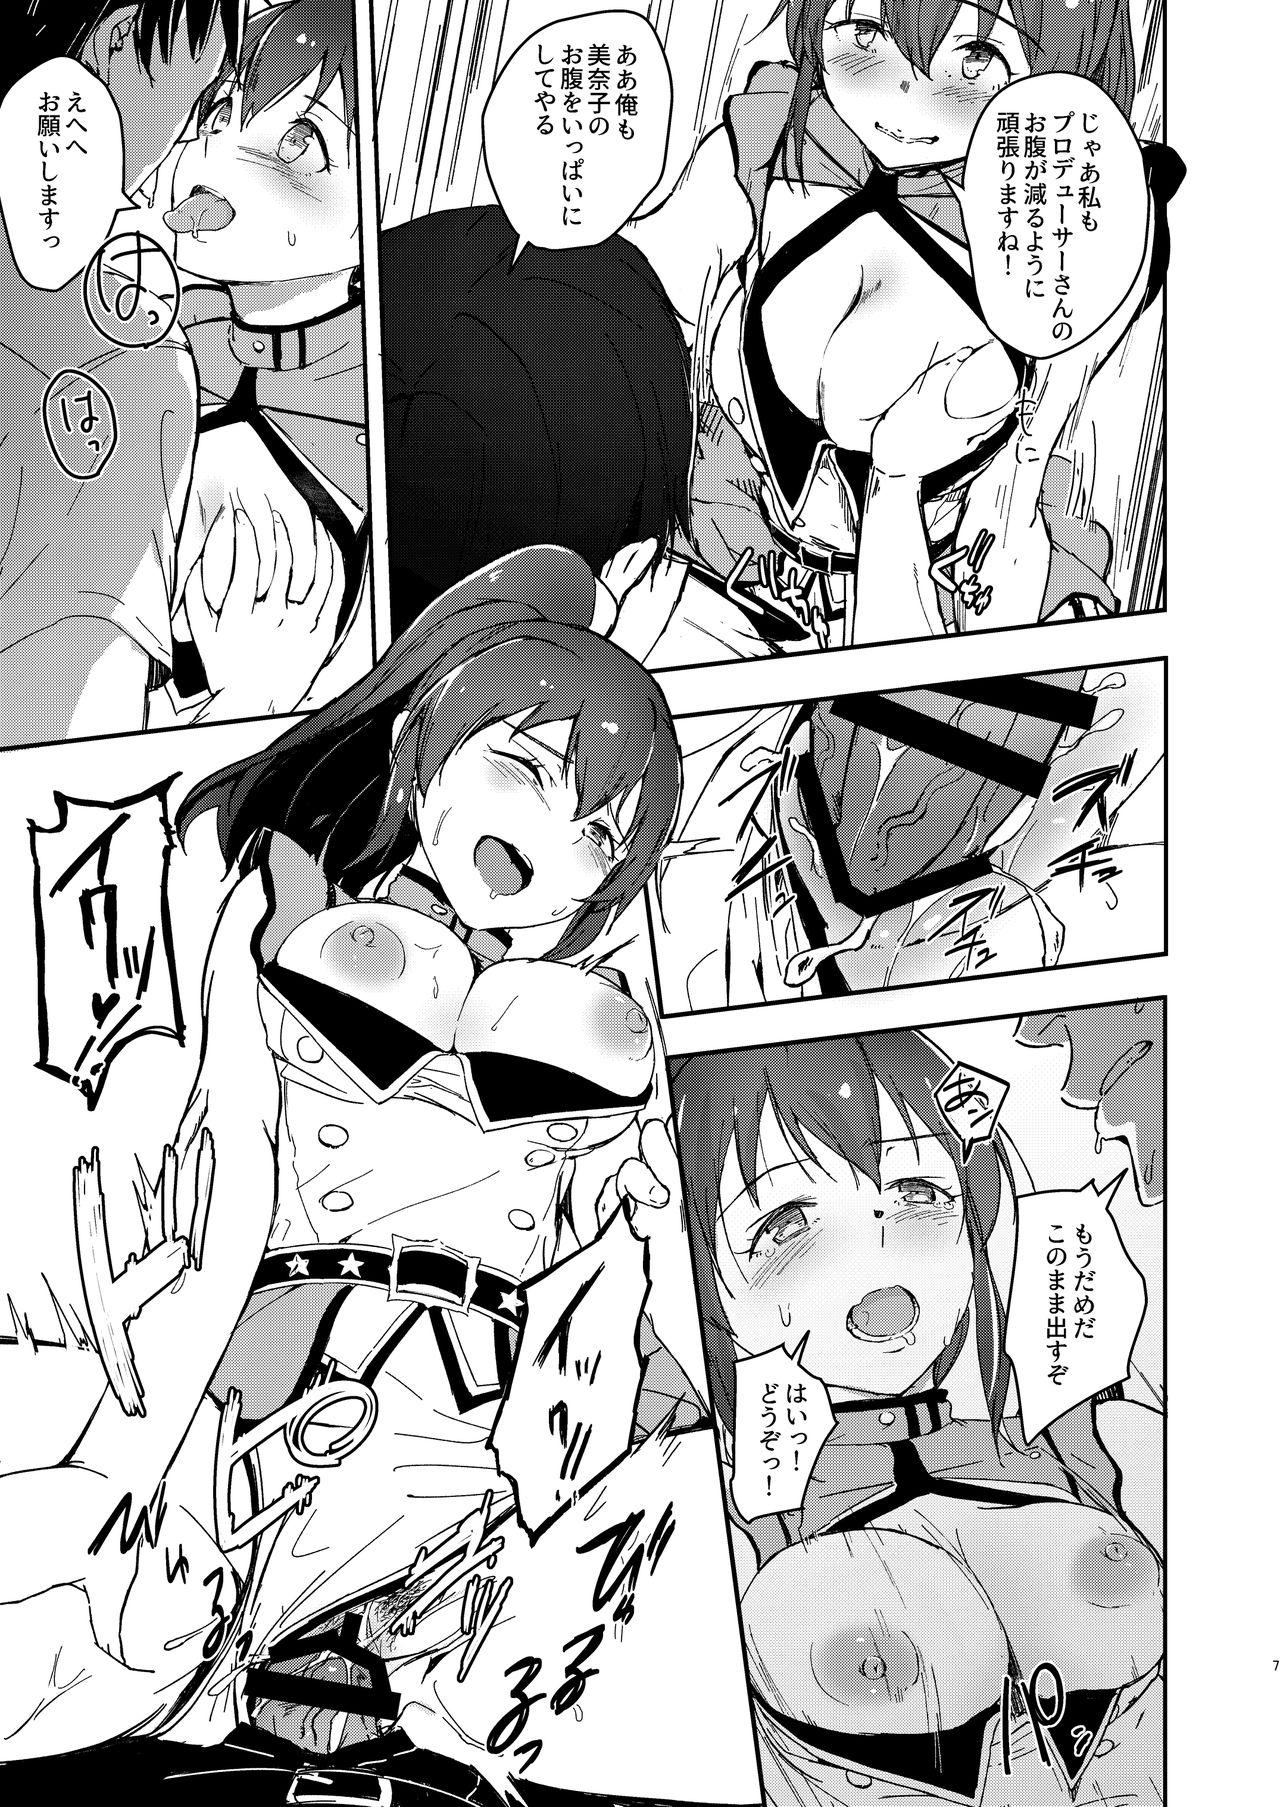 Amature Porn TOP! CLOVER BOOK + omake - The idolmaster Leite - Page 6